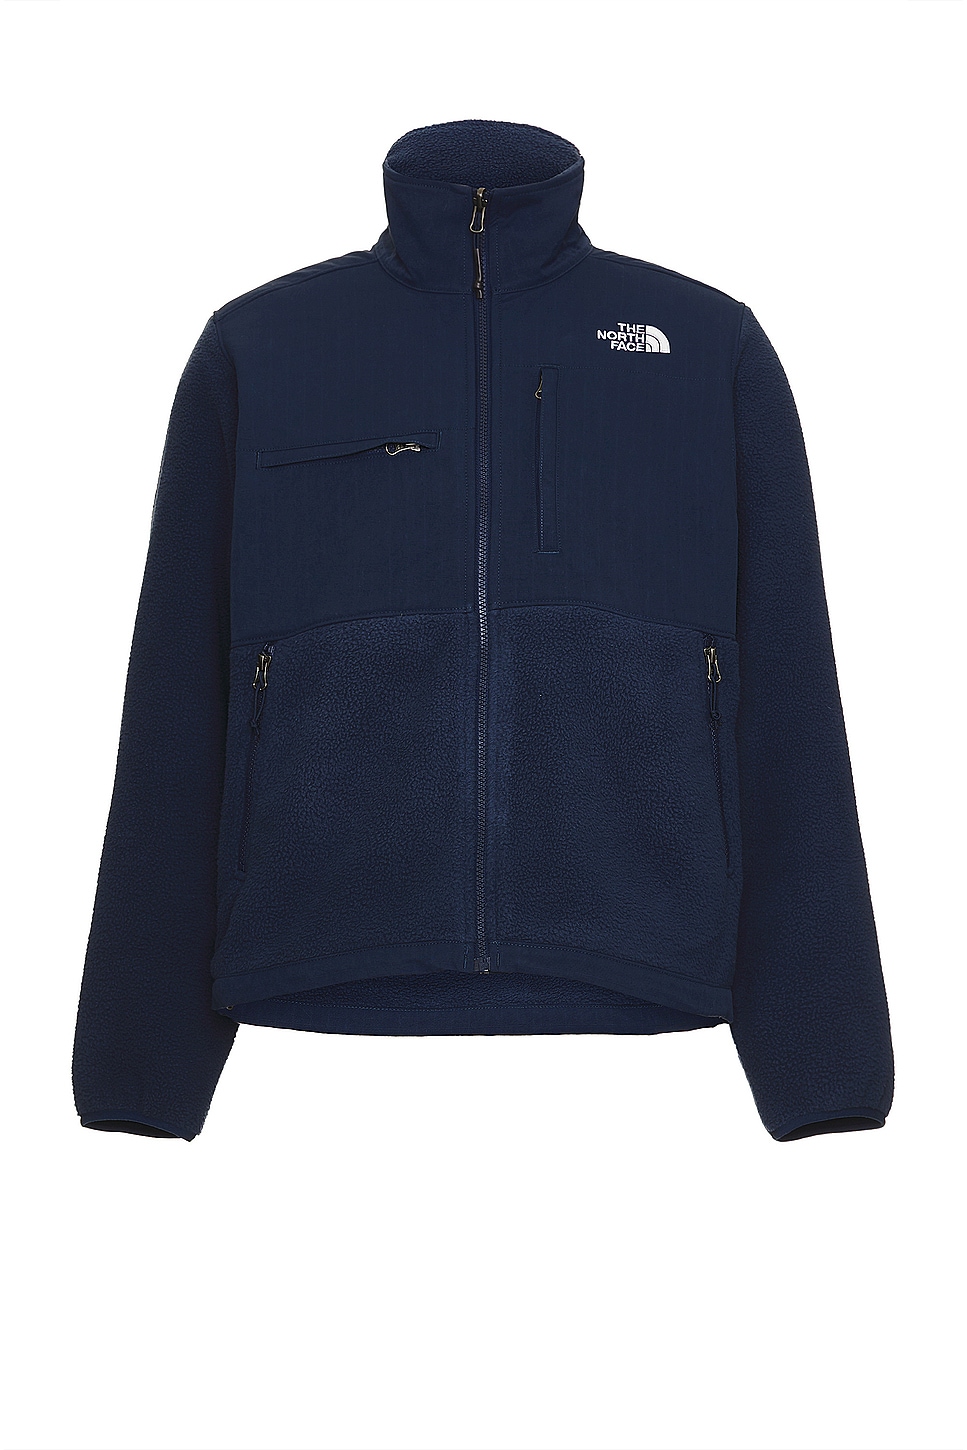 Image 1 of The North Face Ripstop Denali Jacket in Summit Navy